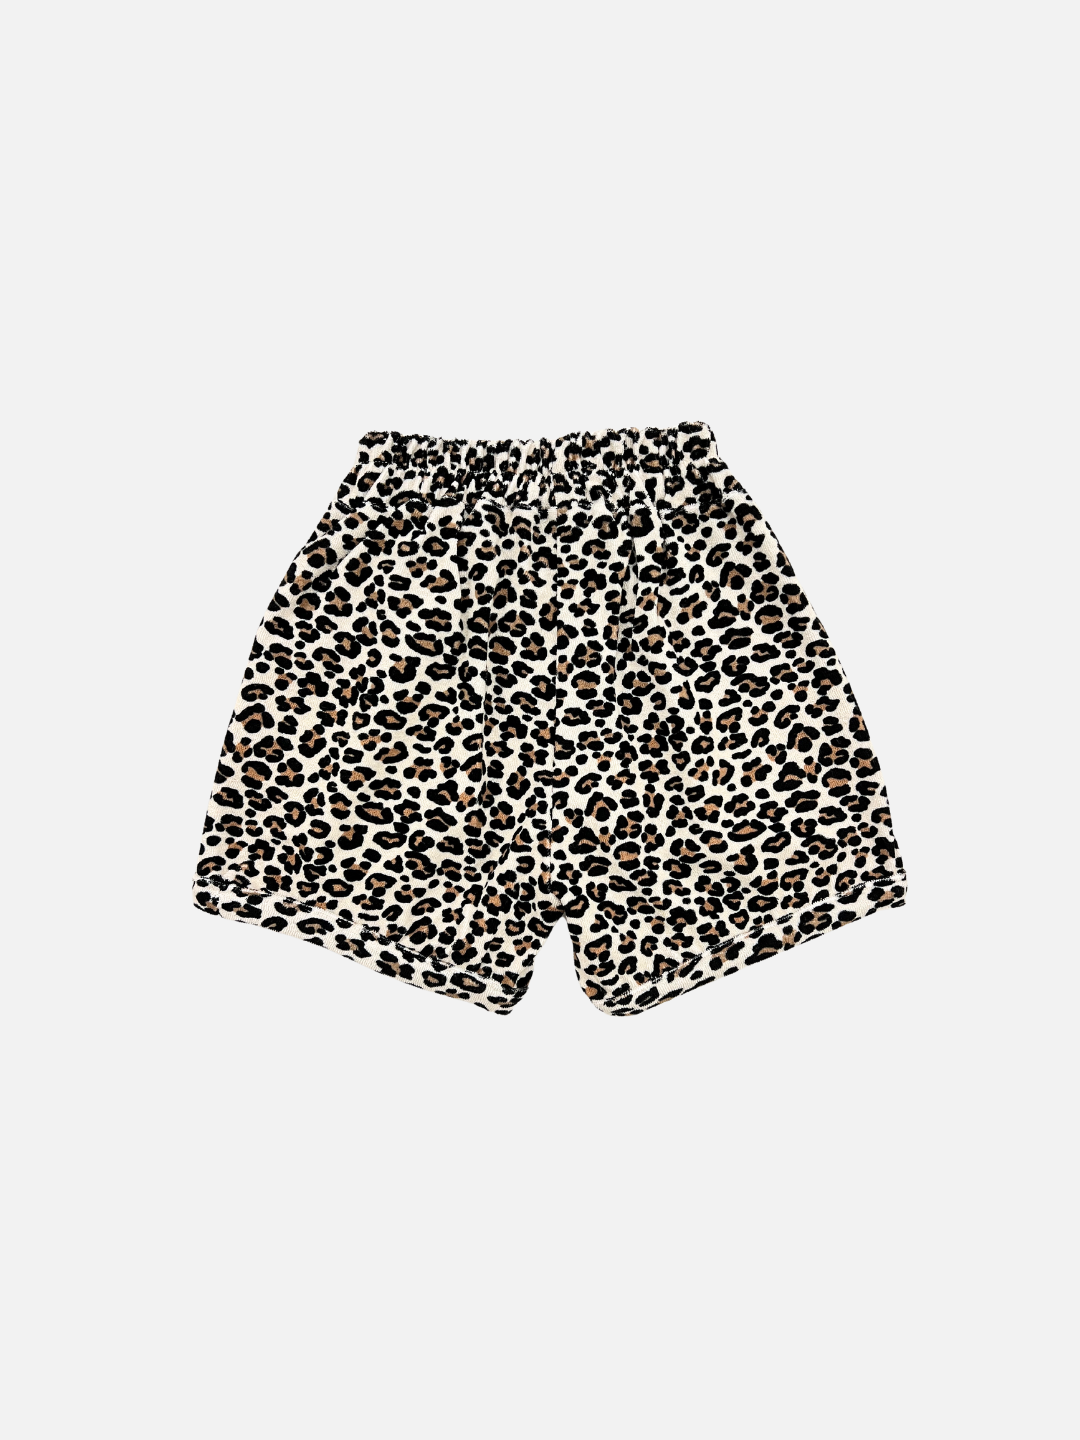 Back view of the kids' Leopard print terrycloth shorts. 